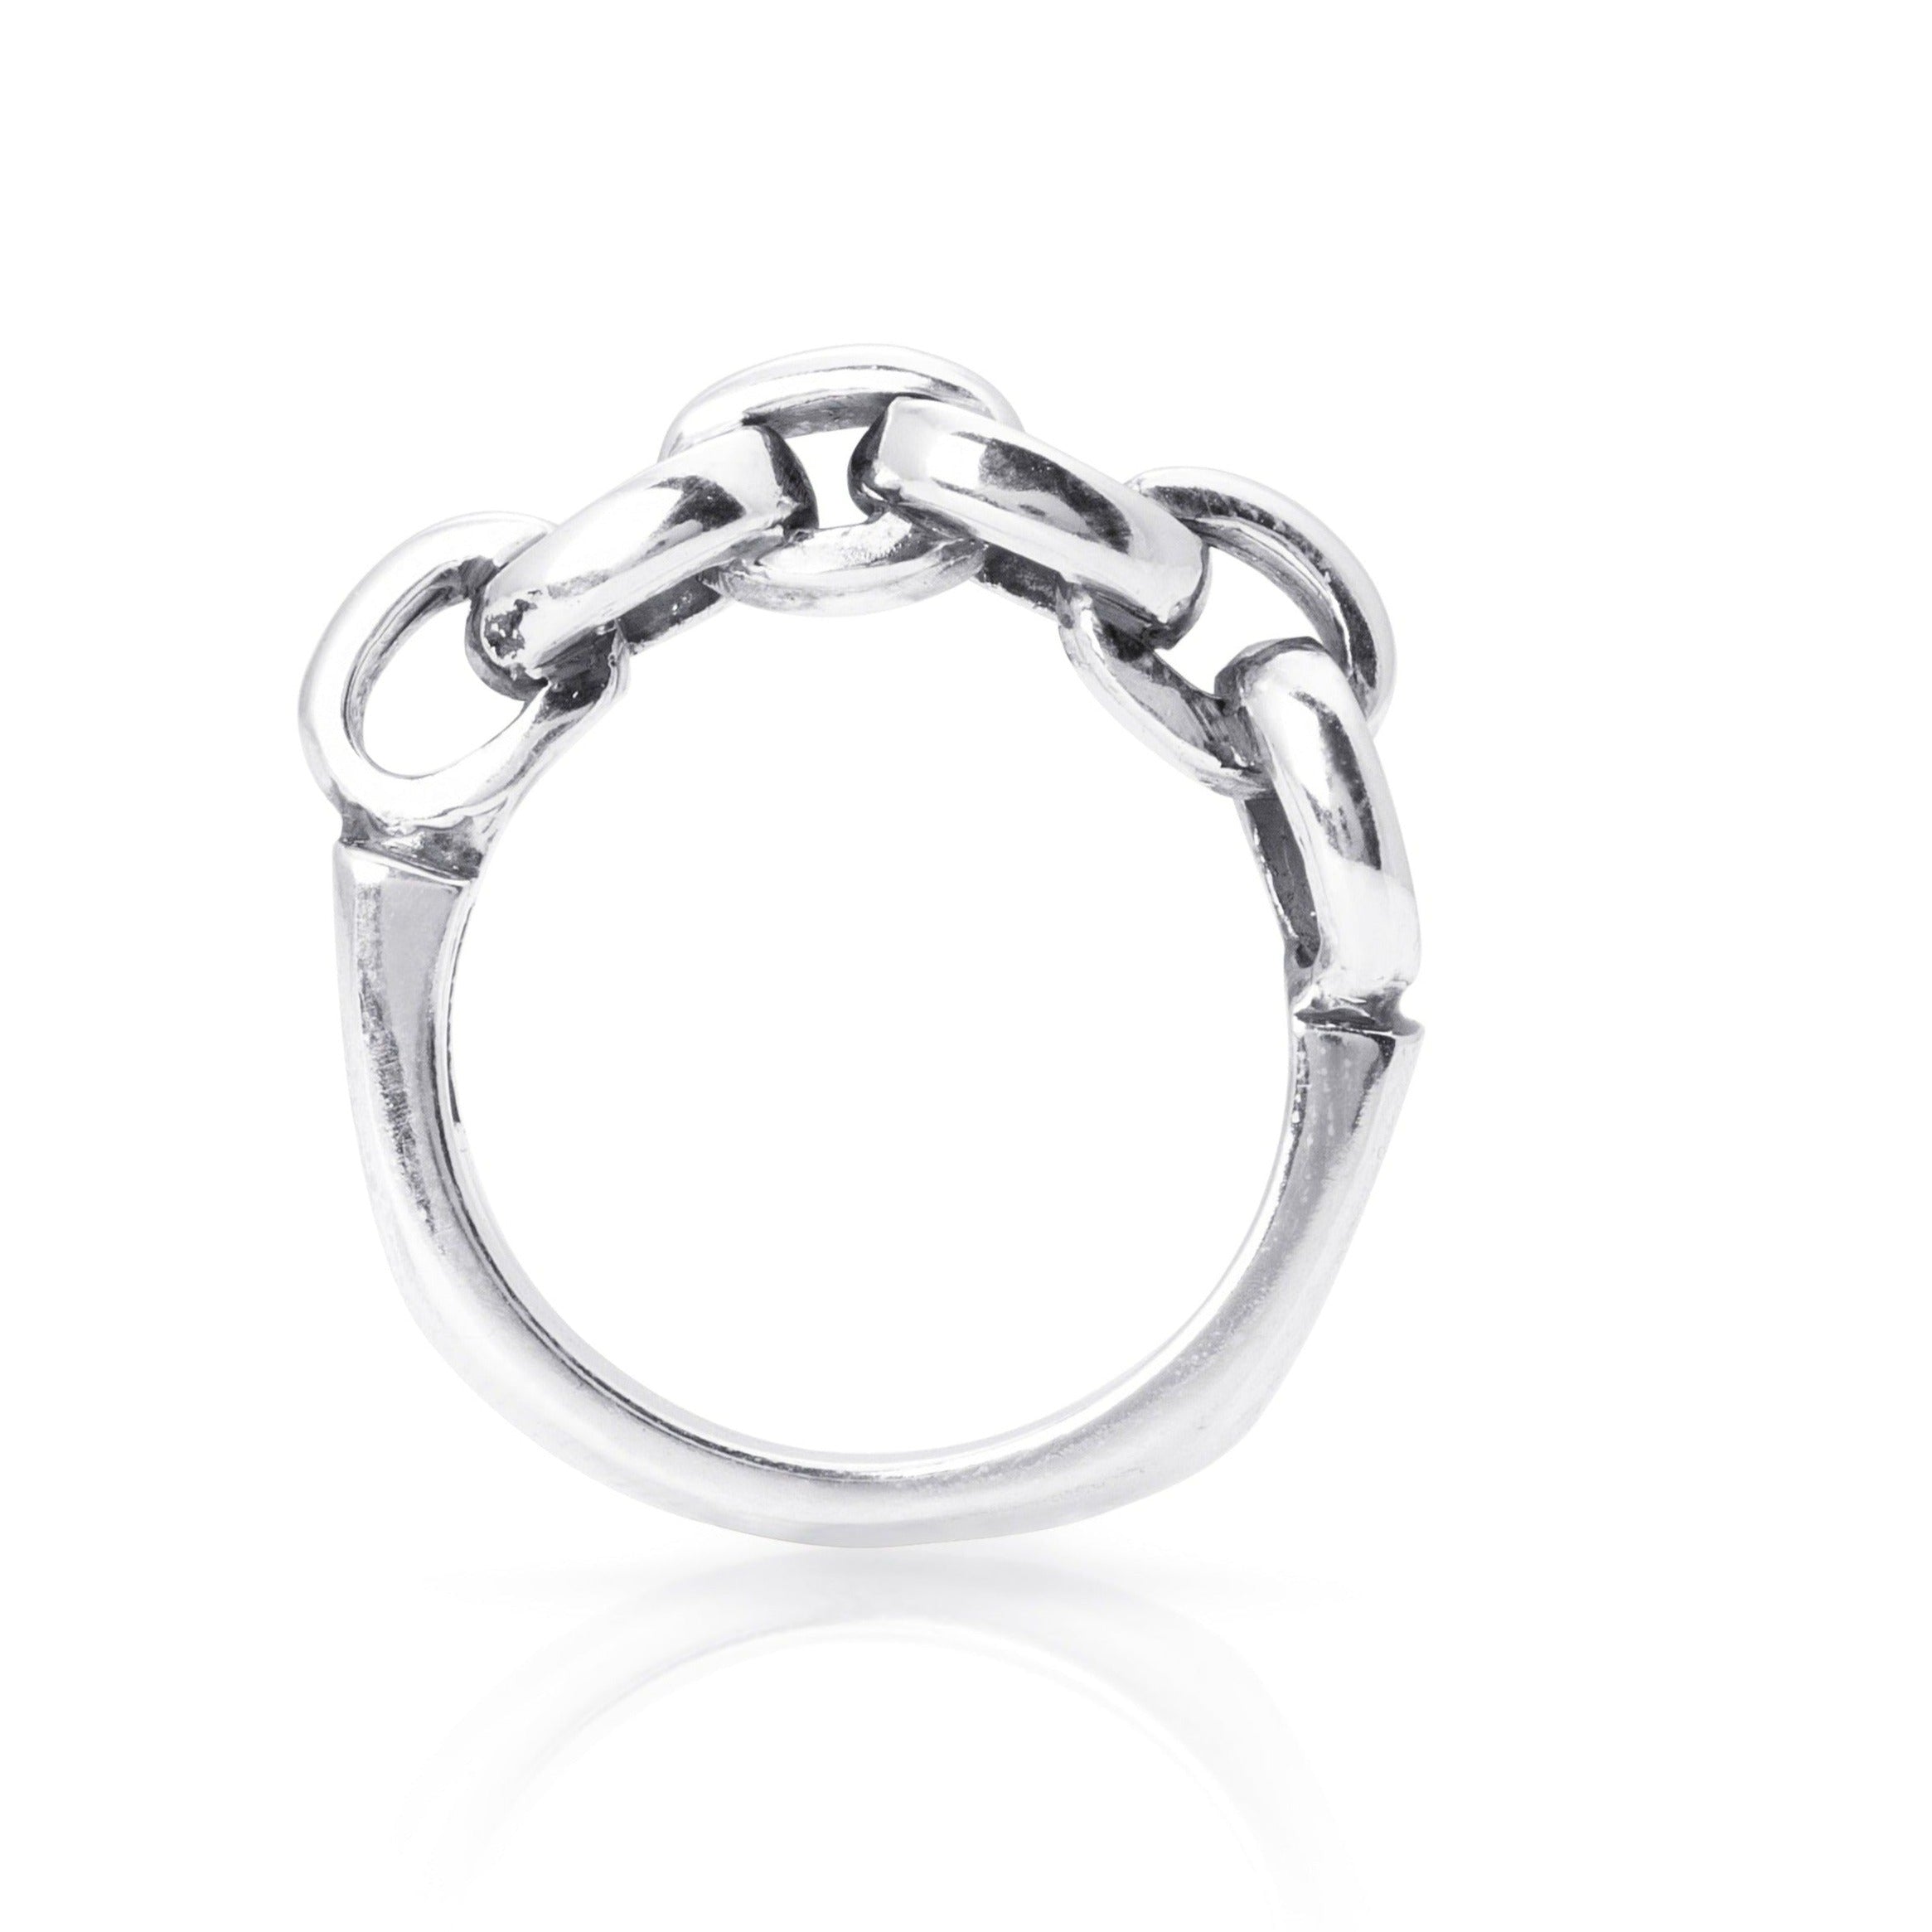 solid sterling silver band with 6 links soldered together on the face